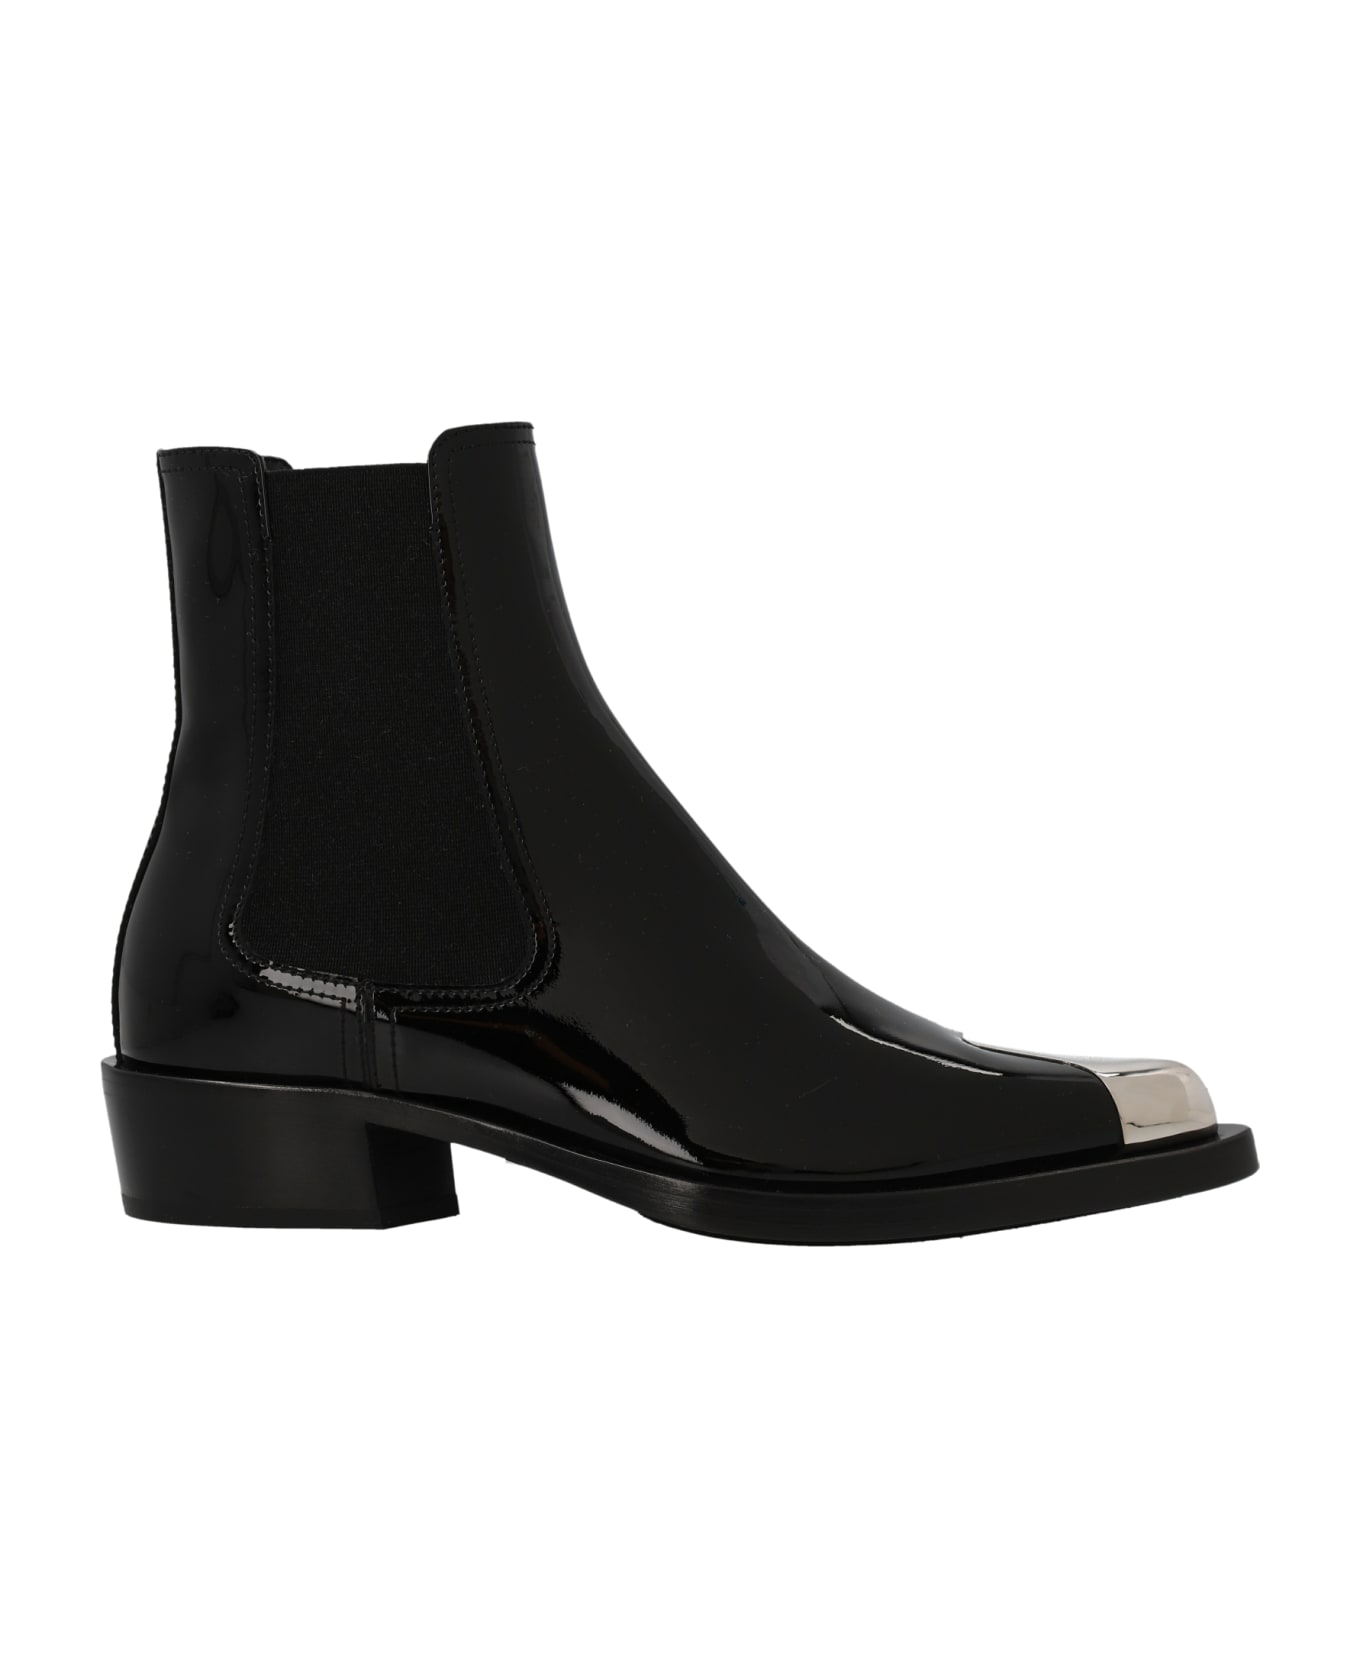 Alexander McQueen Patent Ankle Boots - Black  